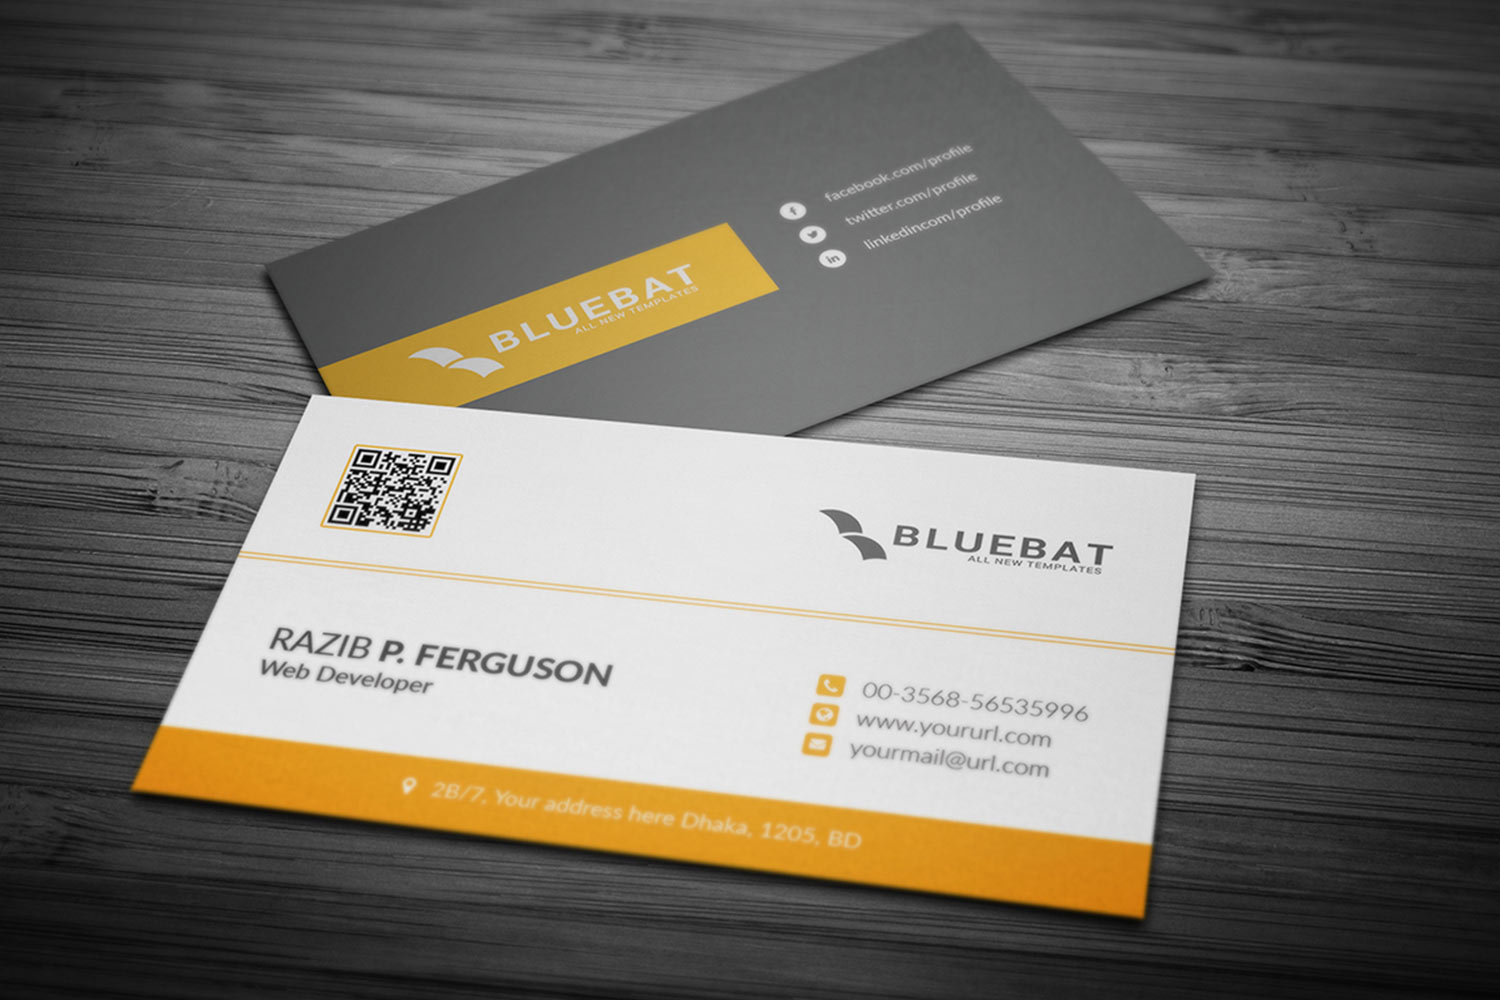 Aesthetic Business Cards